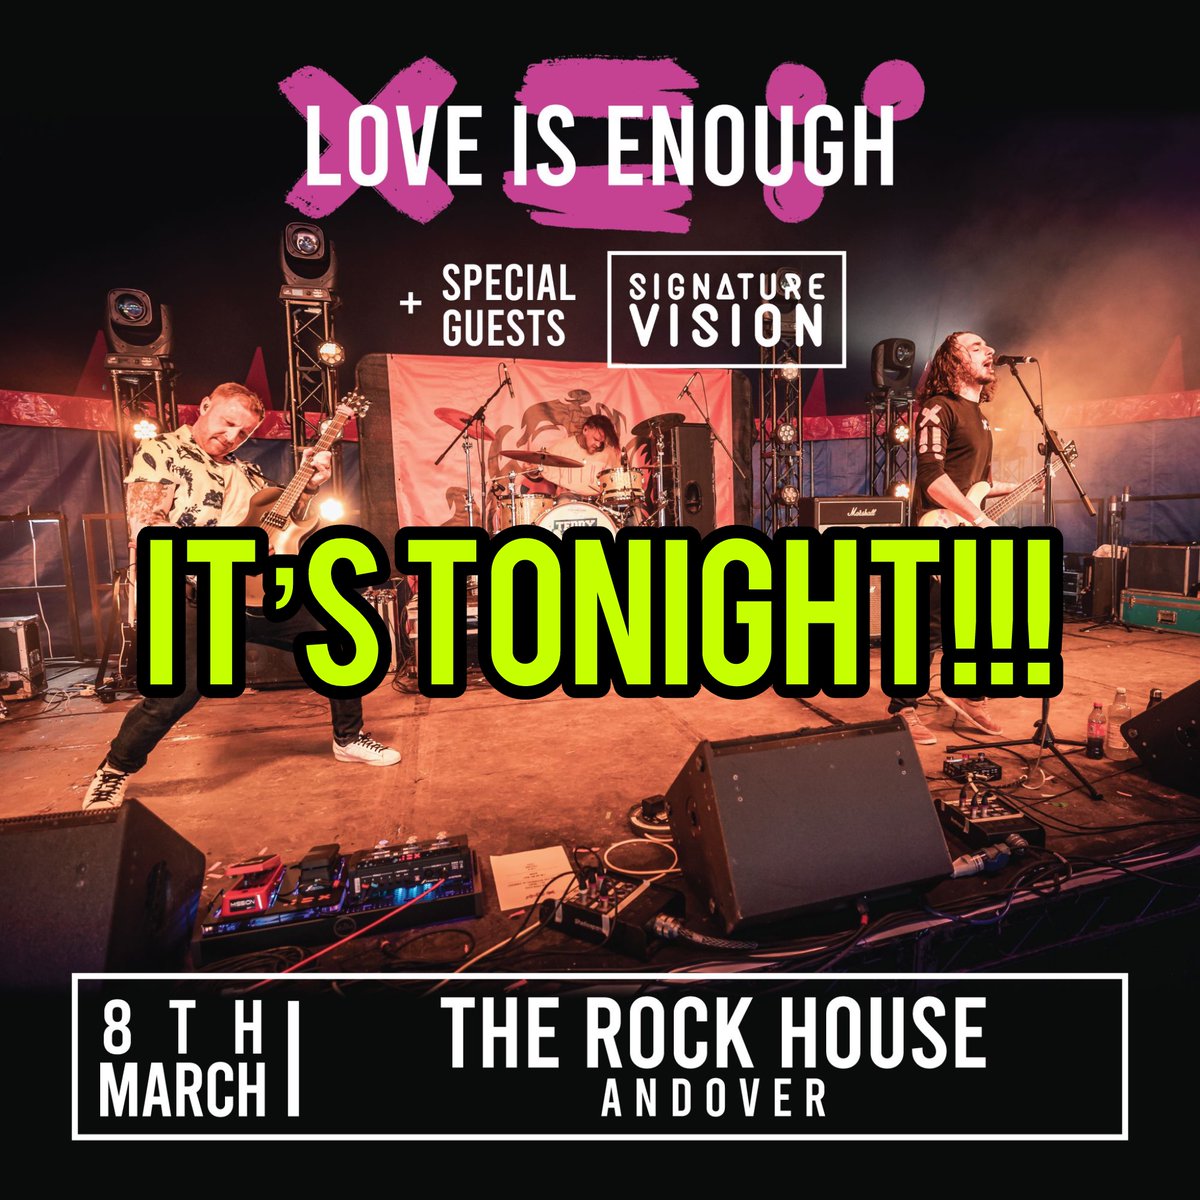 \\\\ IT'S TONIGHT //// 💜ANDOVER SHOW💜 @TheRockHouseUK < Friday 8th March > FREE SHOW 🩷💜🩵 With support from the awesome Signature Vision!!🫶 #LoveIsEnough #Andover #LiveMusic #March #DoNotMissOut #Tonight